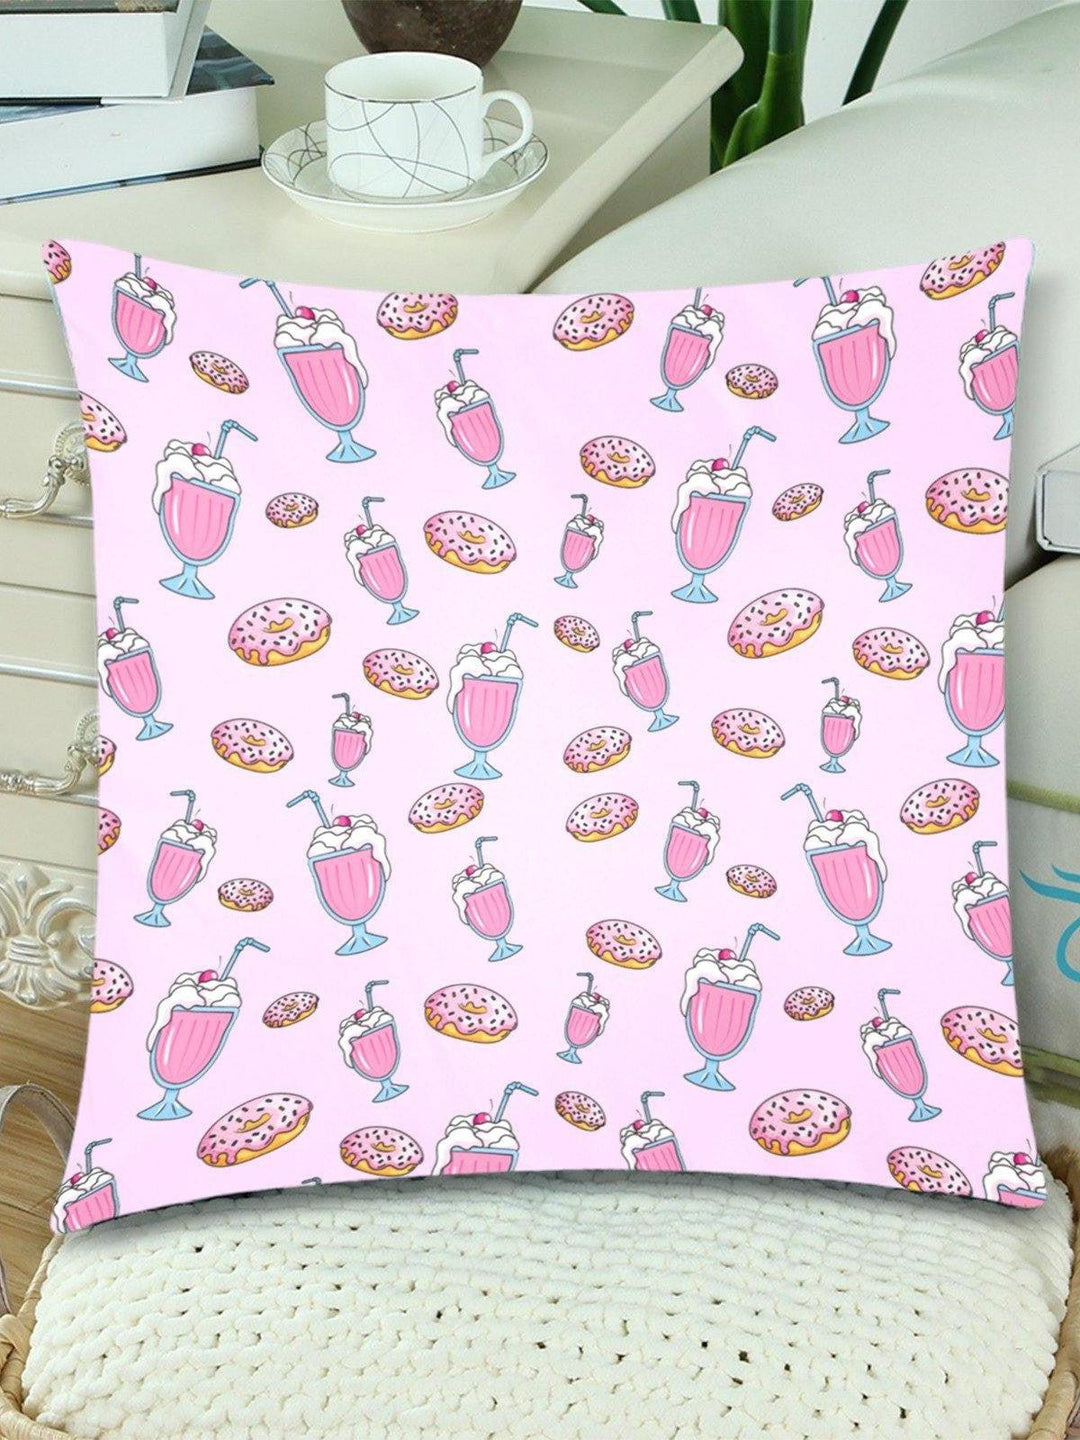 PINK MILKSHAKES Throw Pillow Cover 18"x 18" (Twin Sides) (Set of 2)